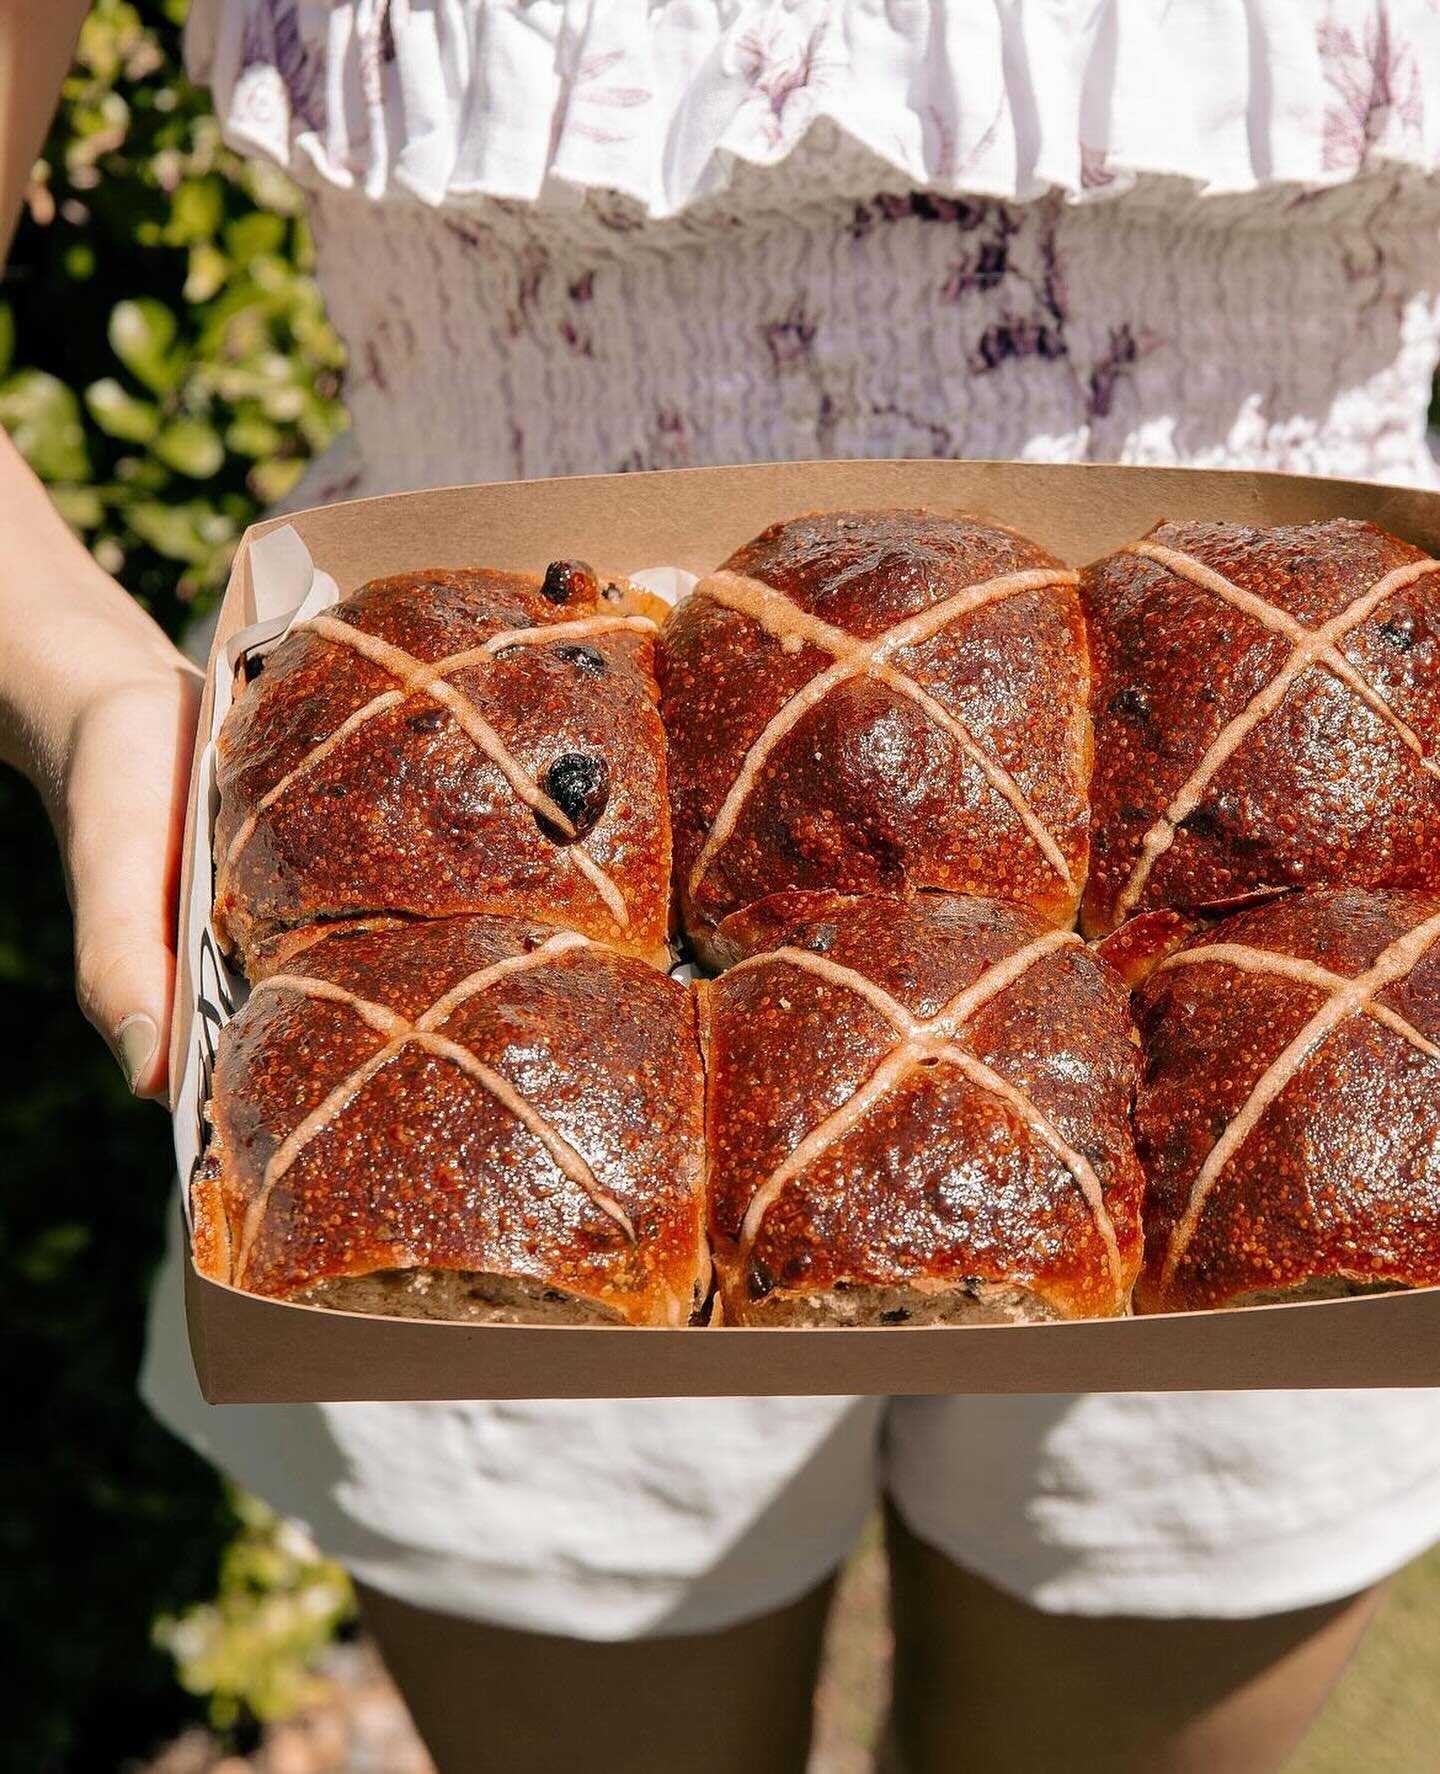 Easter is upon us and we are enjoying the last of the hot cross buns this weekend!  Come and join us 6:30 to 11am each day over this long weekend 🐰🐰🐰 #bneeaster #bnecafes #albion